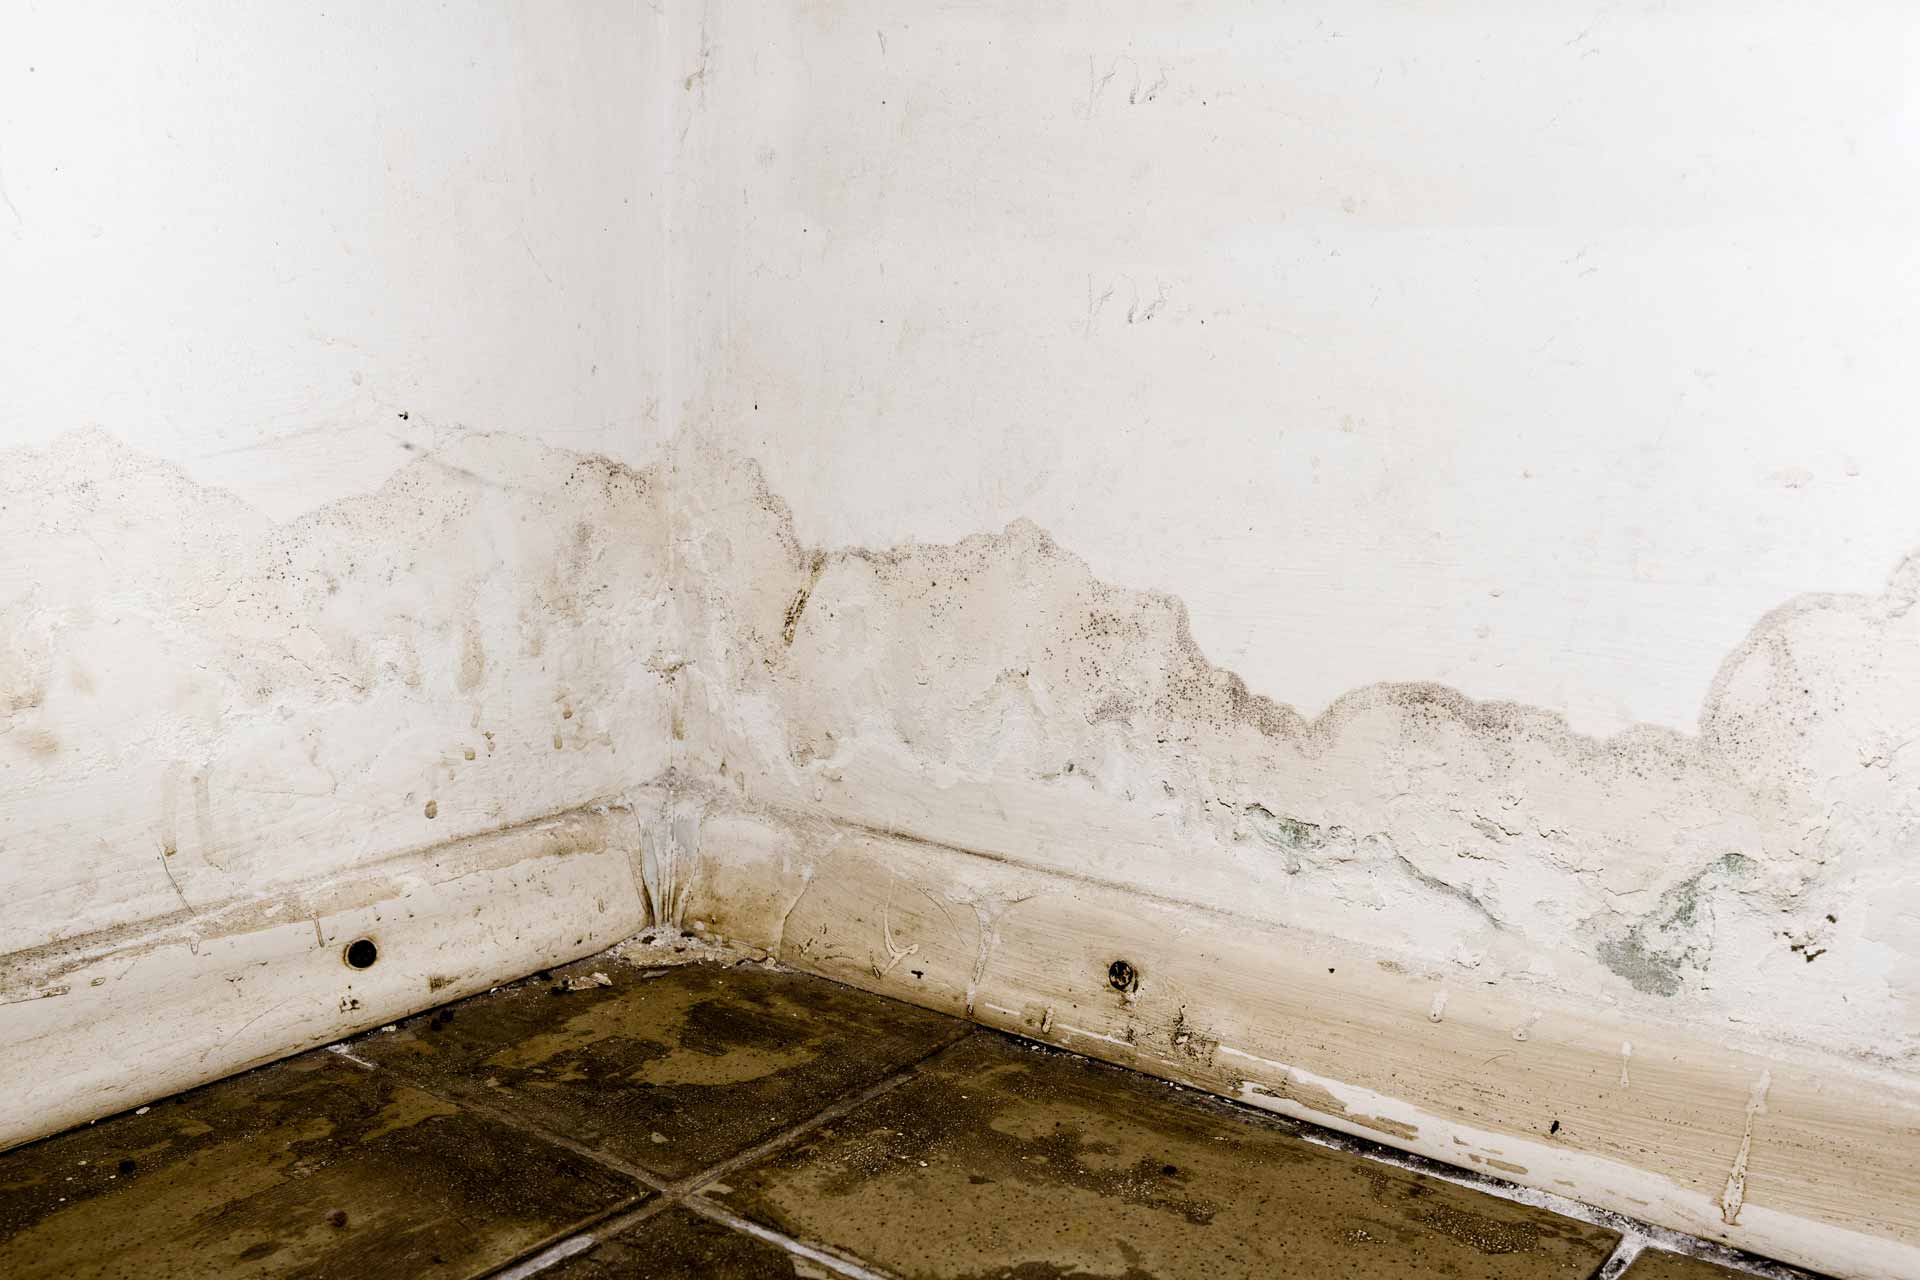 Corner of room with standing water and moldy baseboard